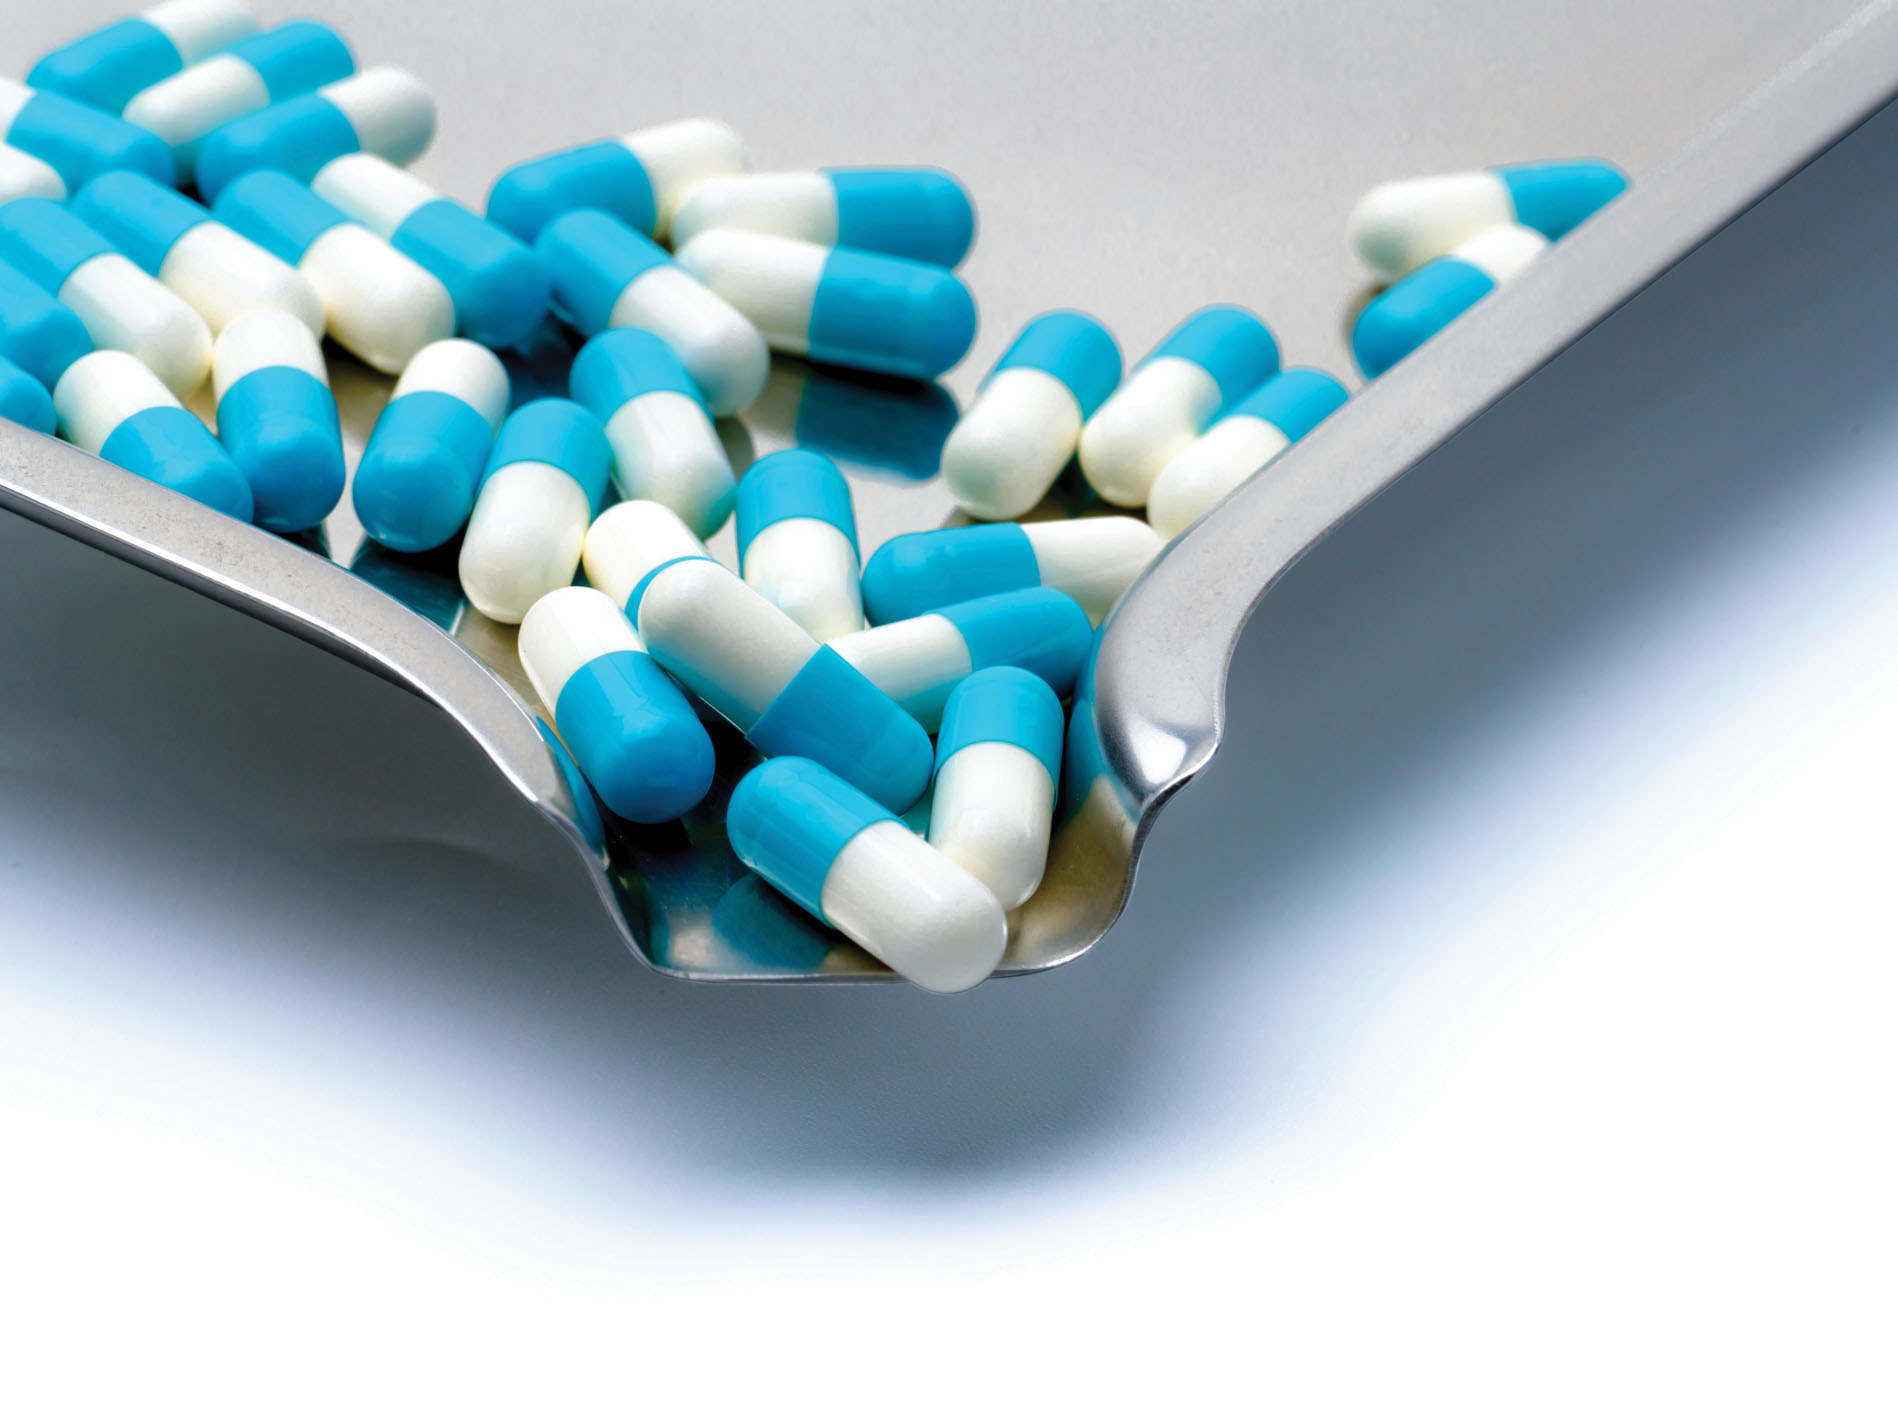 Capsule oral dosage forms: providing benefits throughout the entire drug product lifecycle 